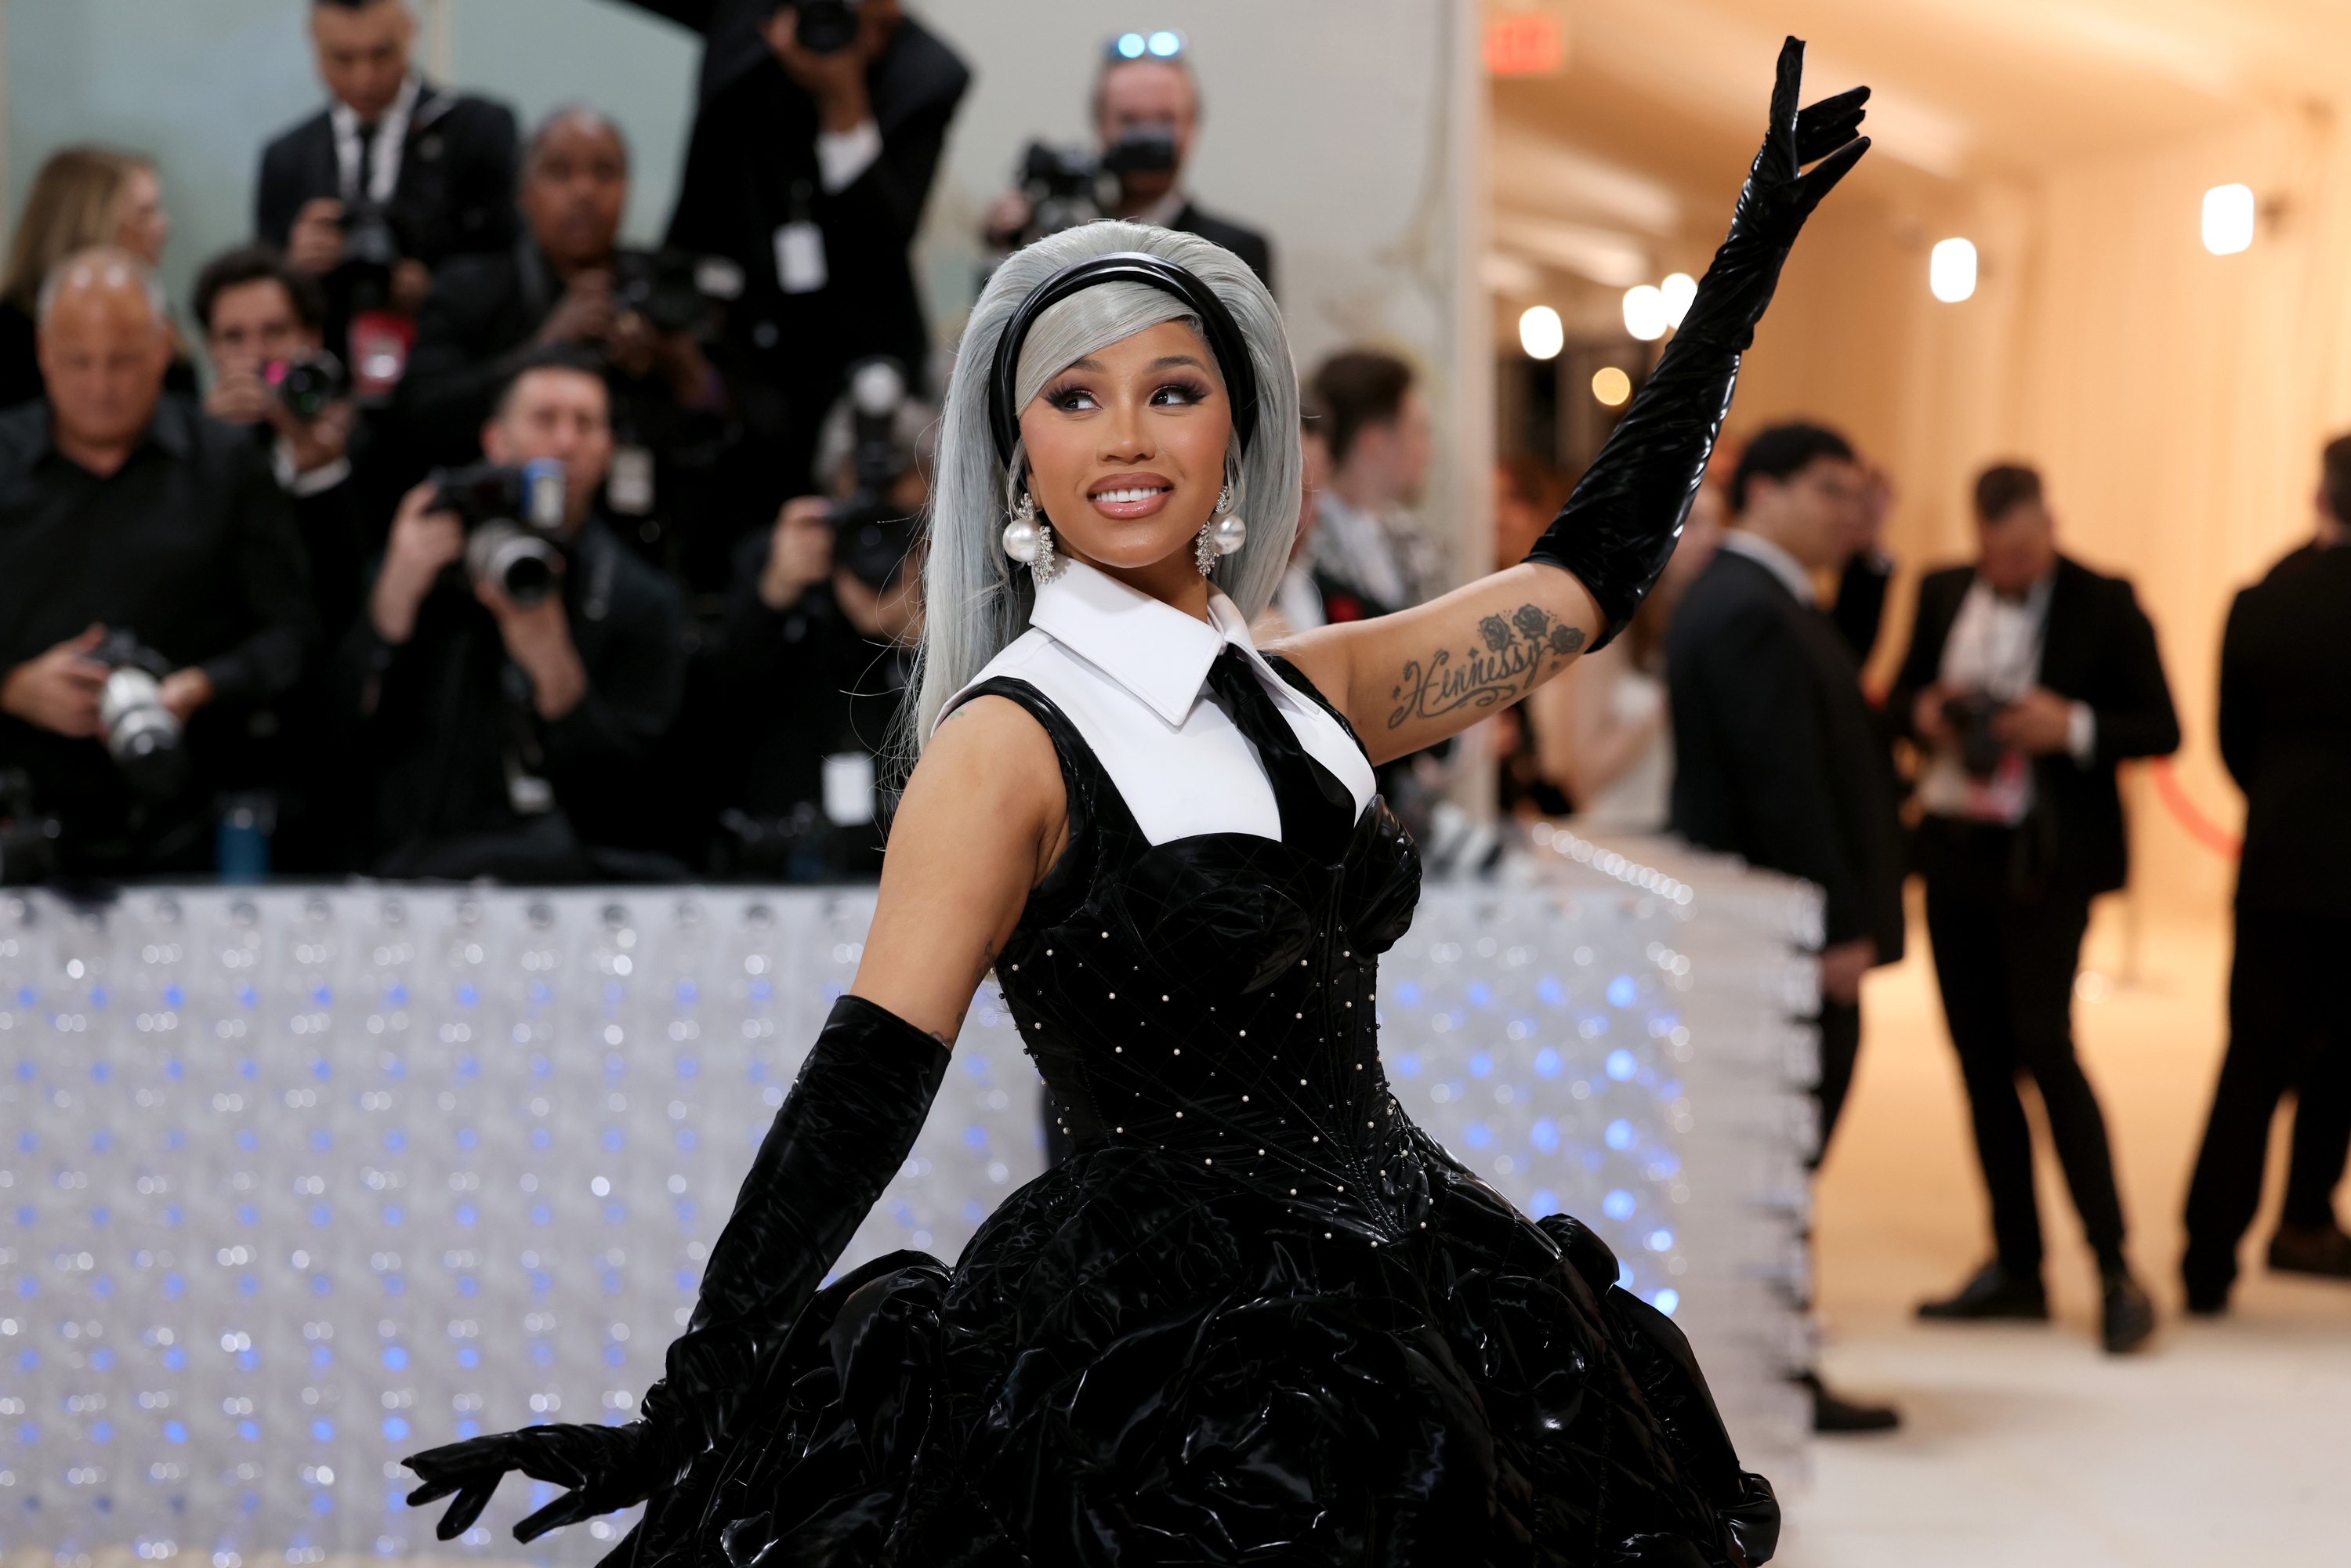 Cardi B's Met Gala carpet appearance included an outfit change.